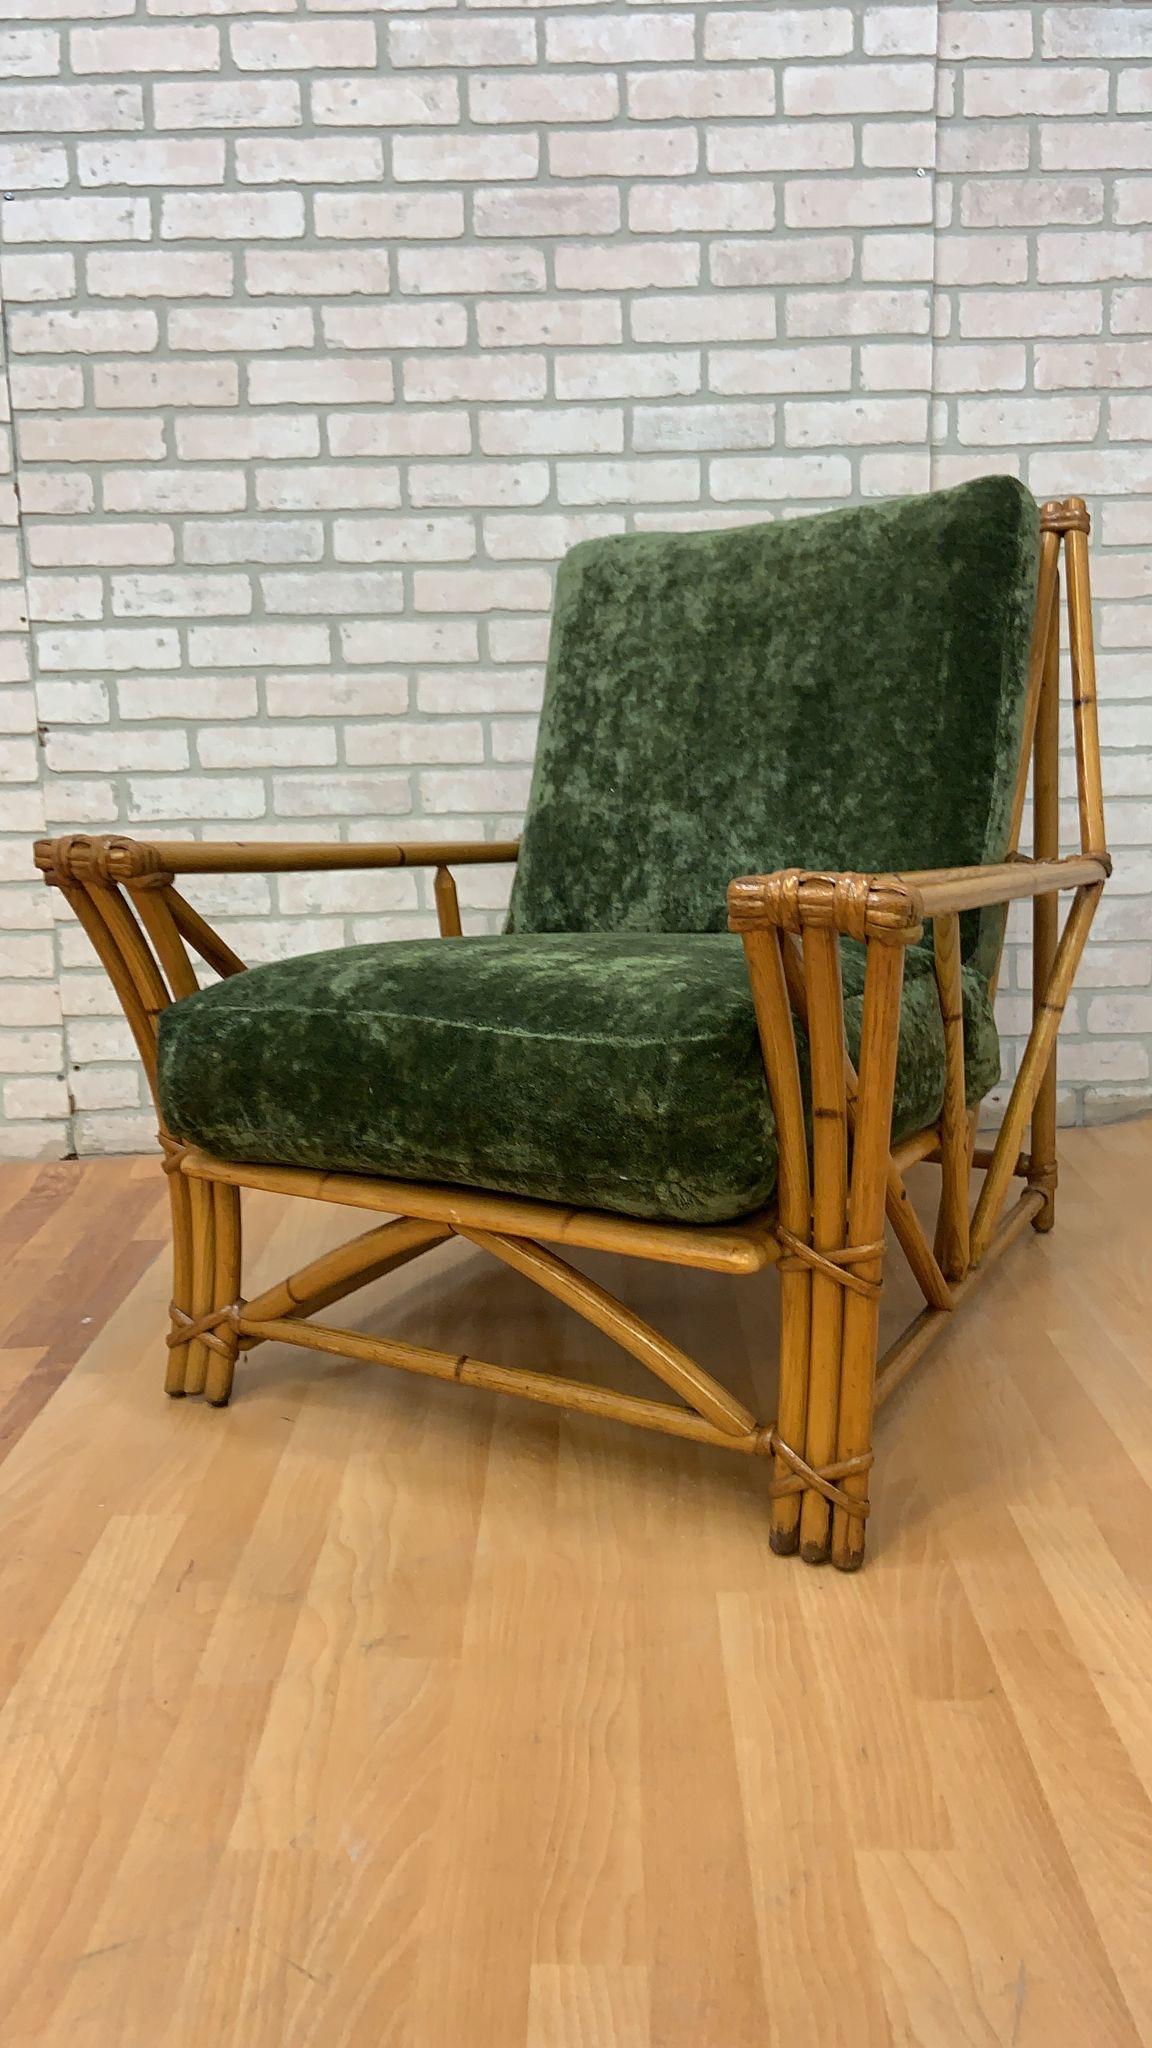 MCM Heywood Wakefield Ashcraft Rattan Lounge Chairs Newly Upholstered - Set of 2 For Sale 7